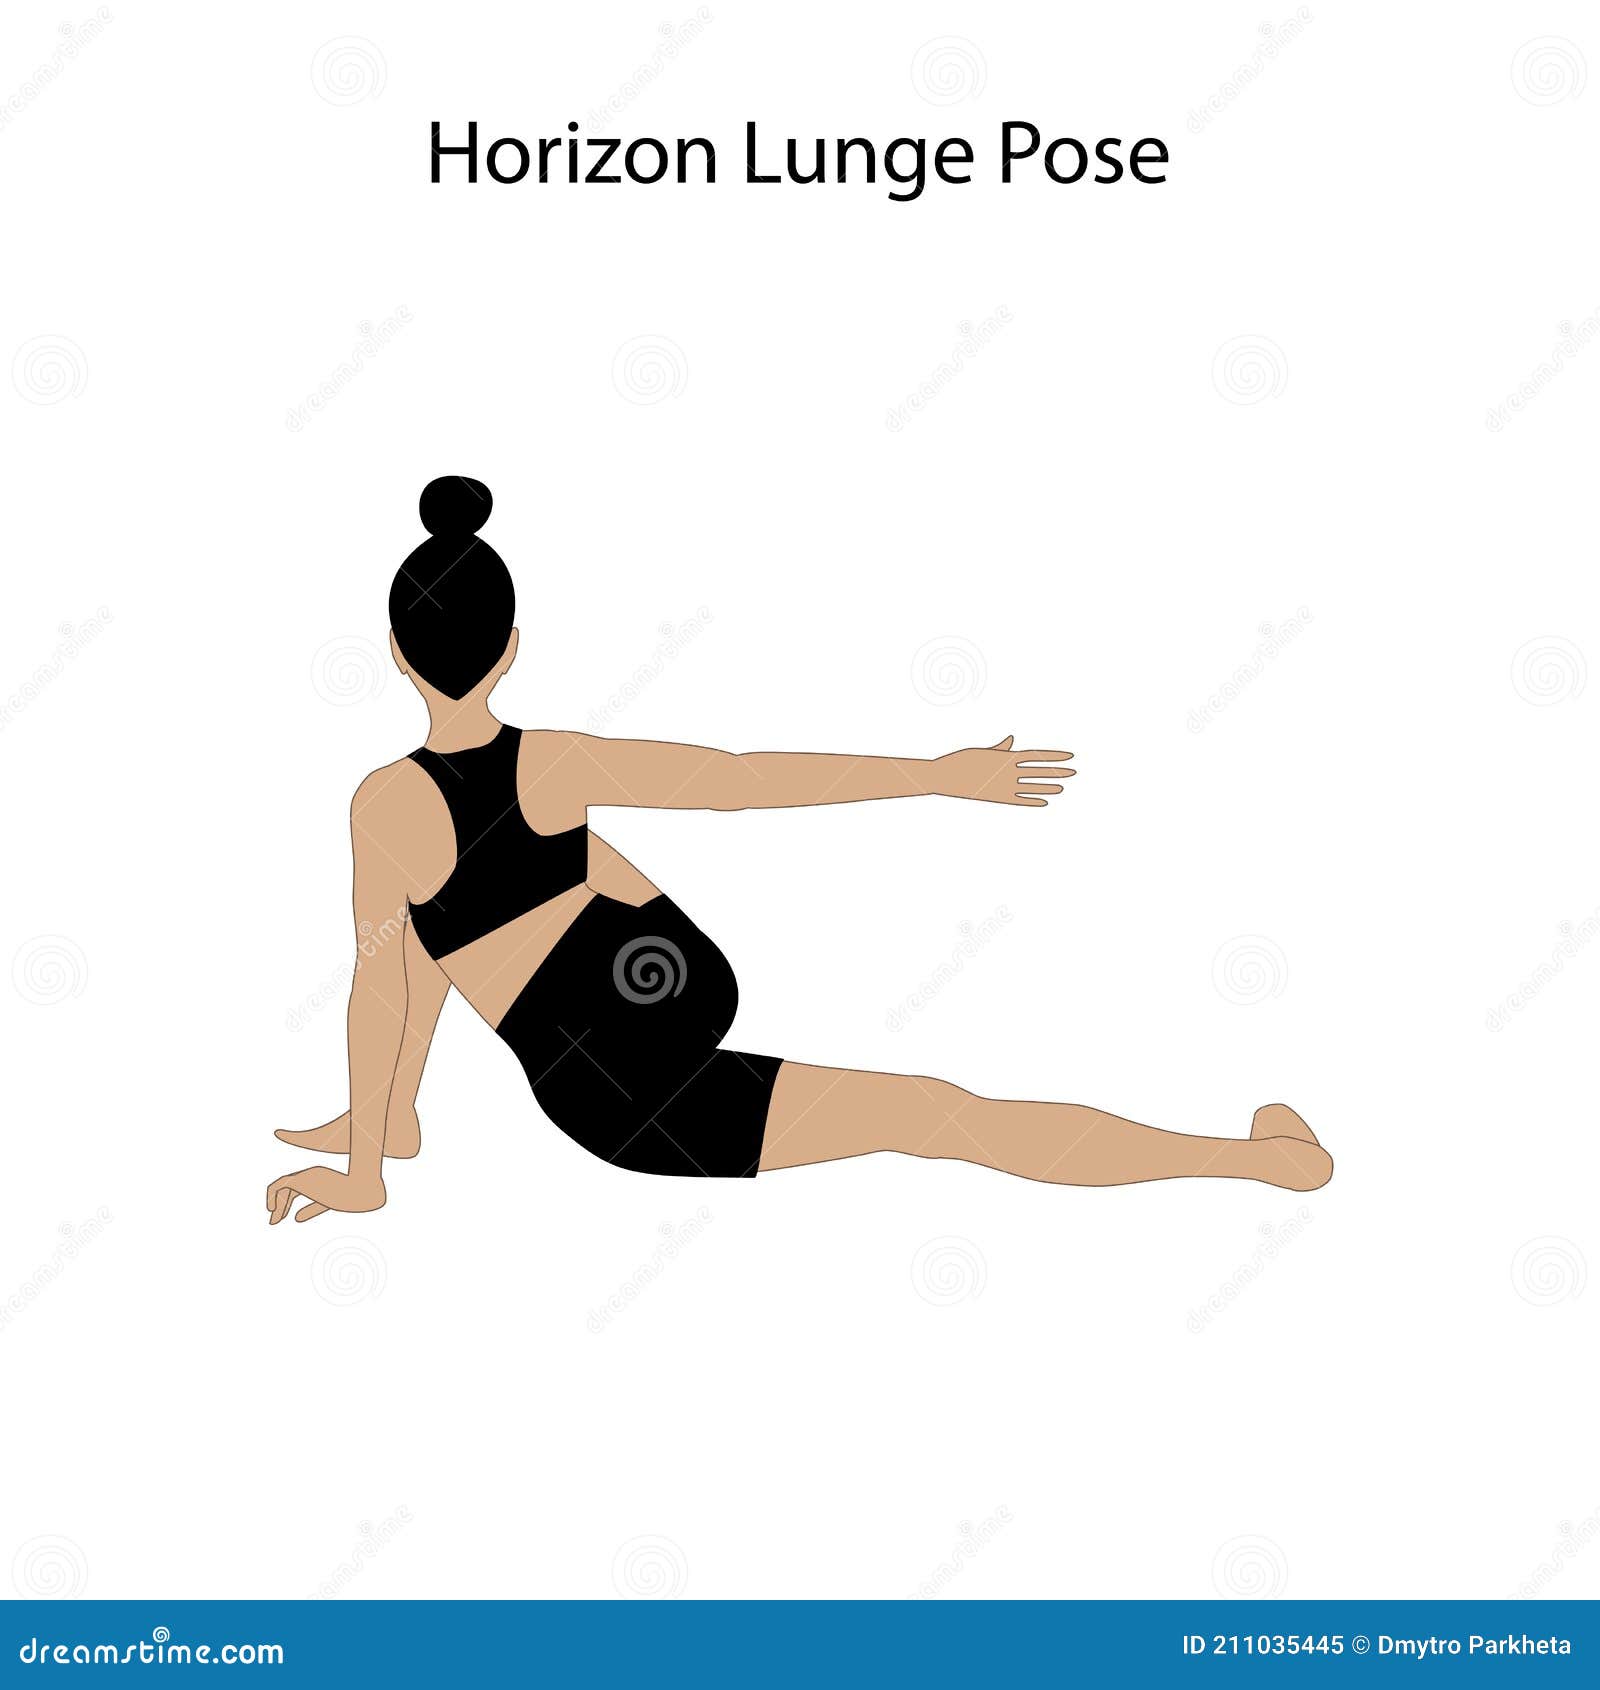 Horizon Lunge Pose Yoga Workout. Healthy Lifestyle Vector Illustration  Stock Vector - Illustration of exercise, human: 211035445